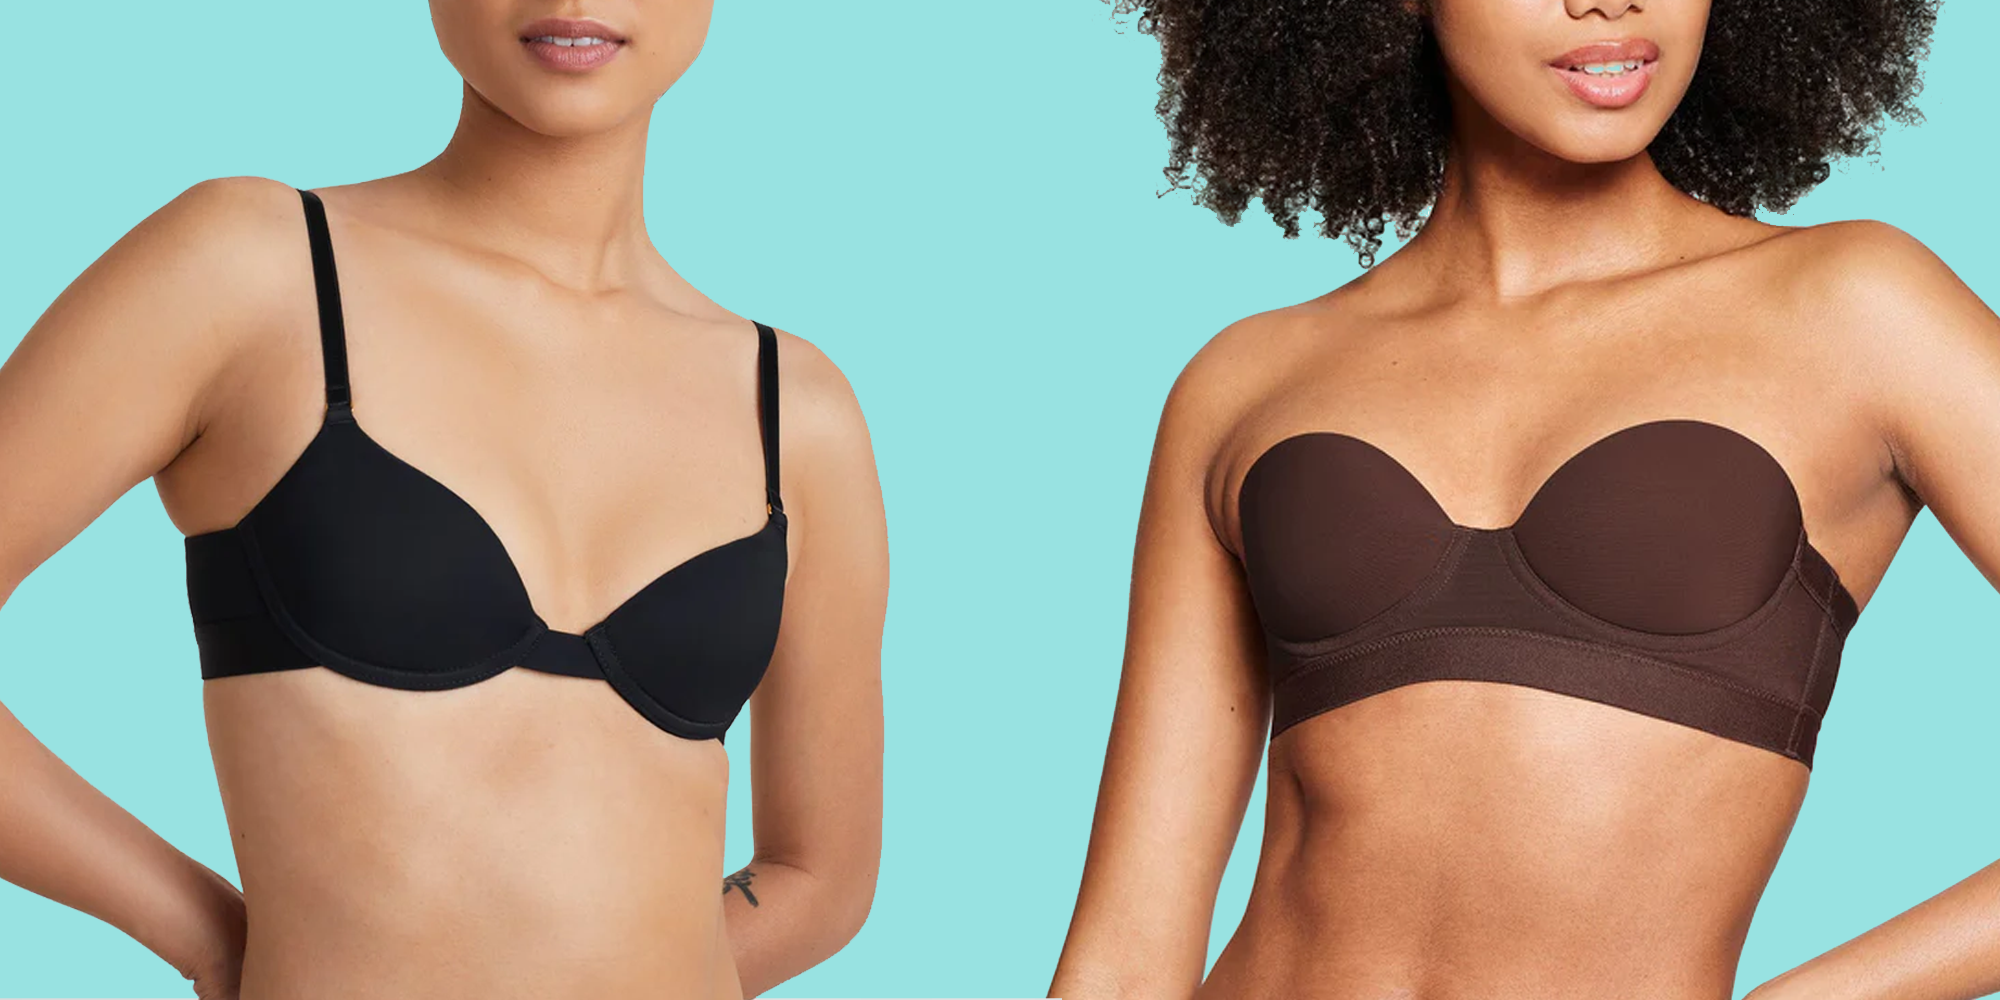 Pepper Is the AAPI-Owned Brand That Makes Bras to Fit Small Boobs